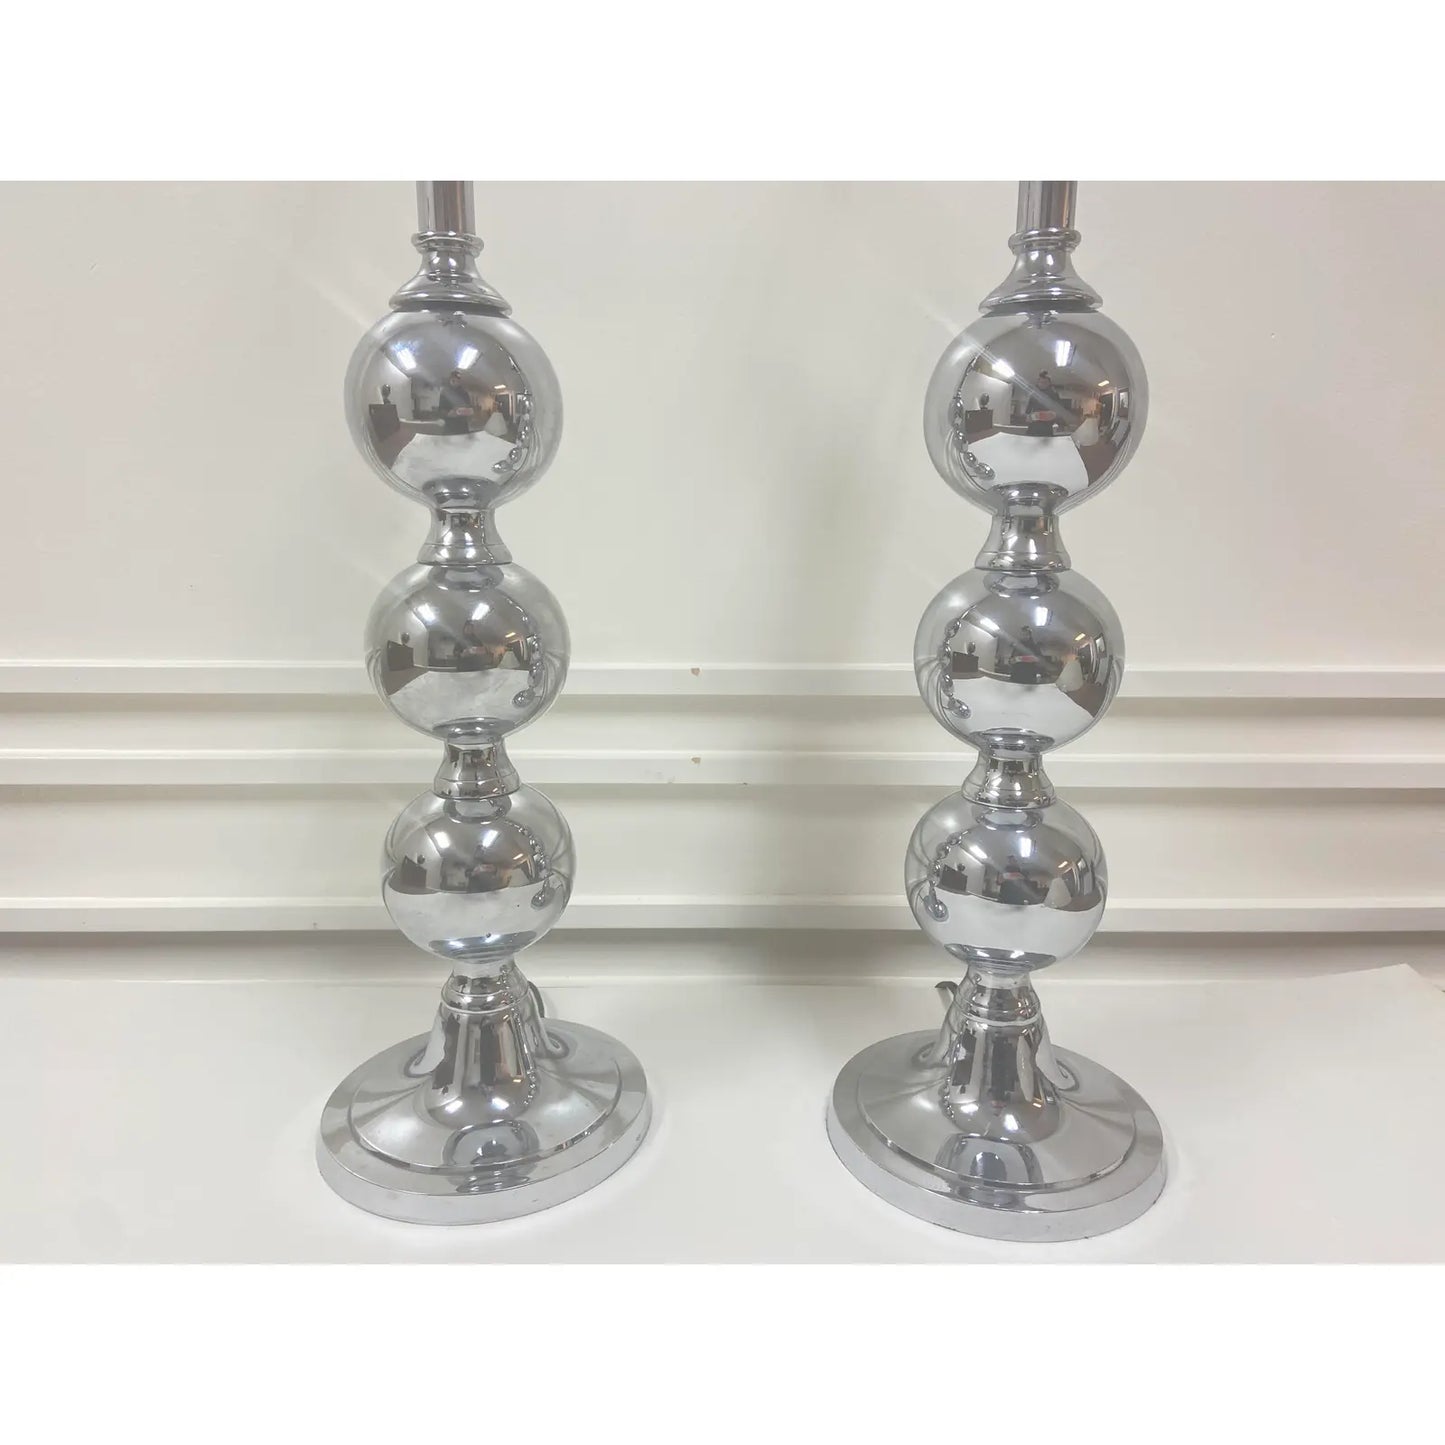 MODERNIST CHROME STACKED BALL LAMPS - PAIR